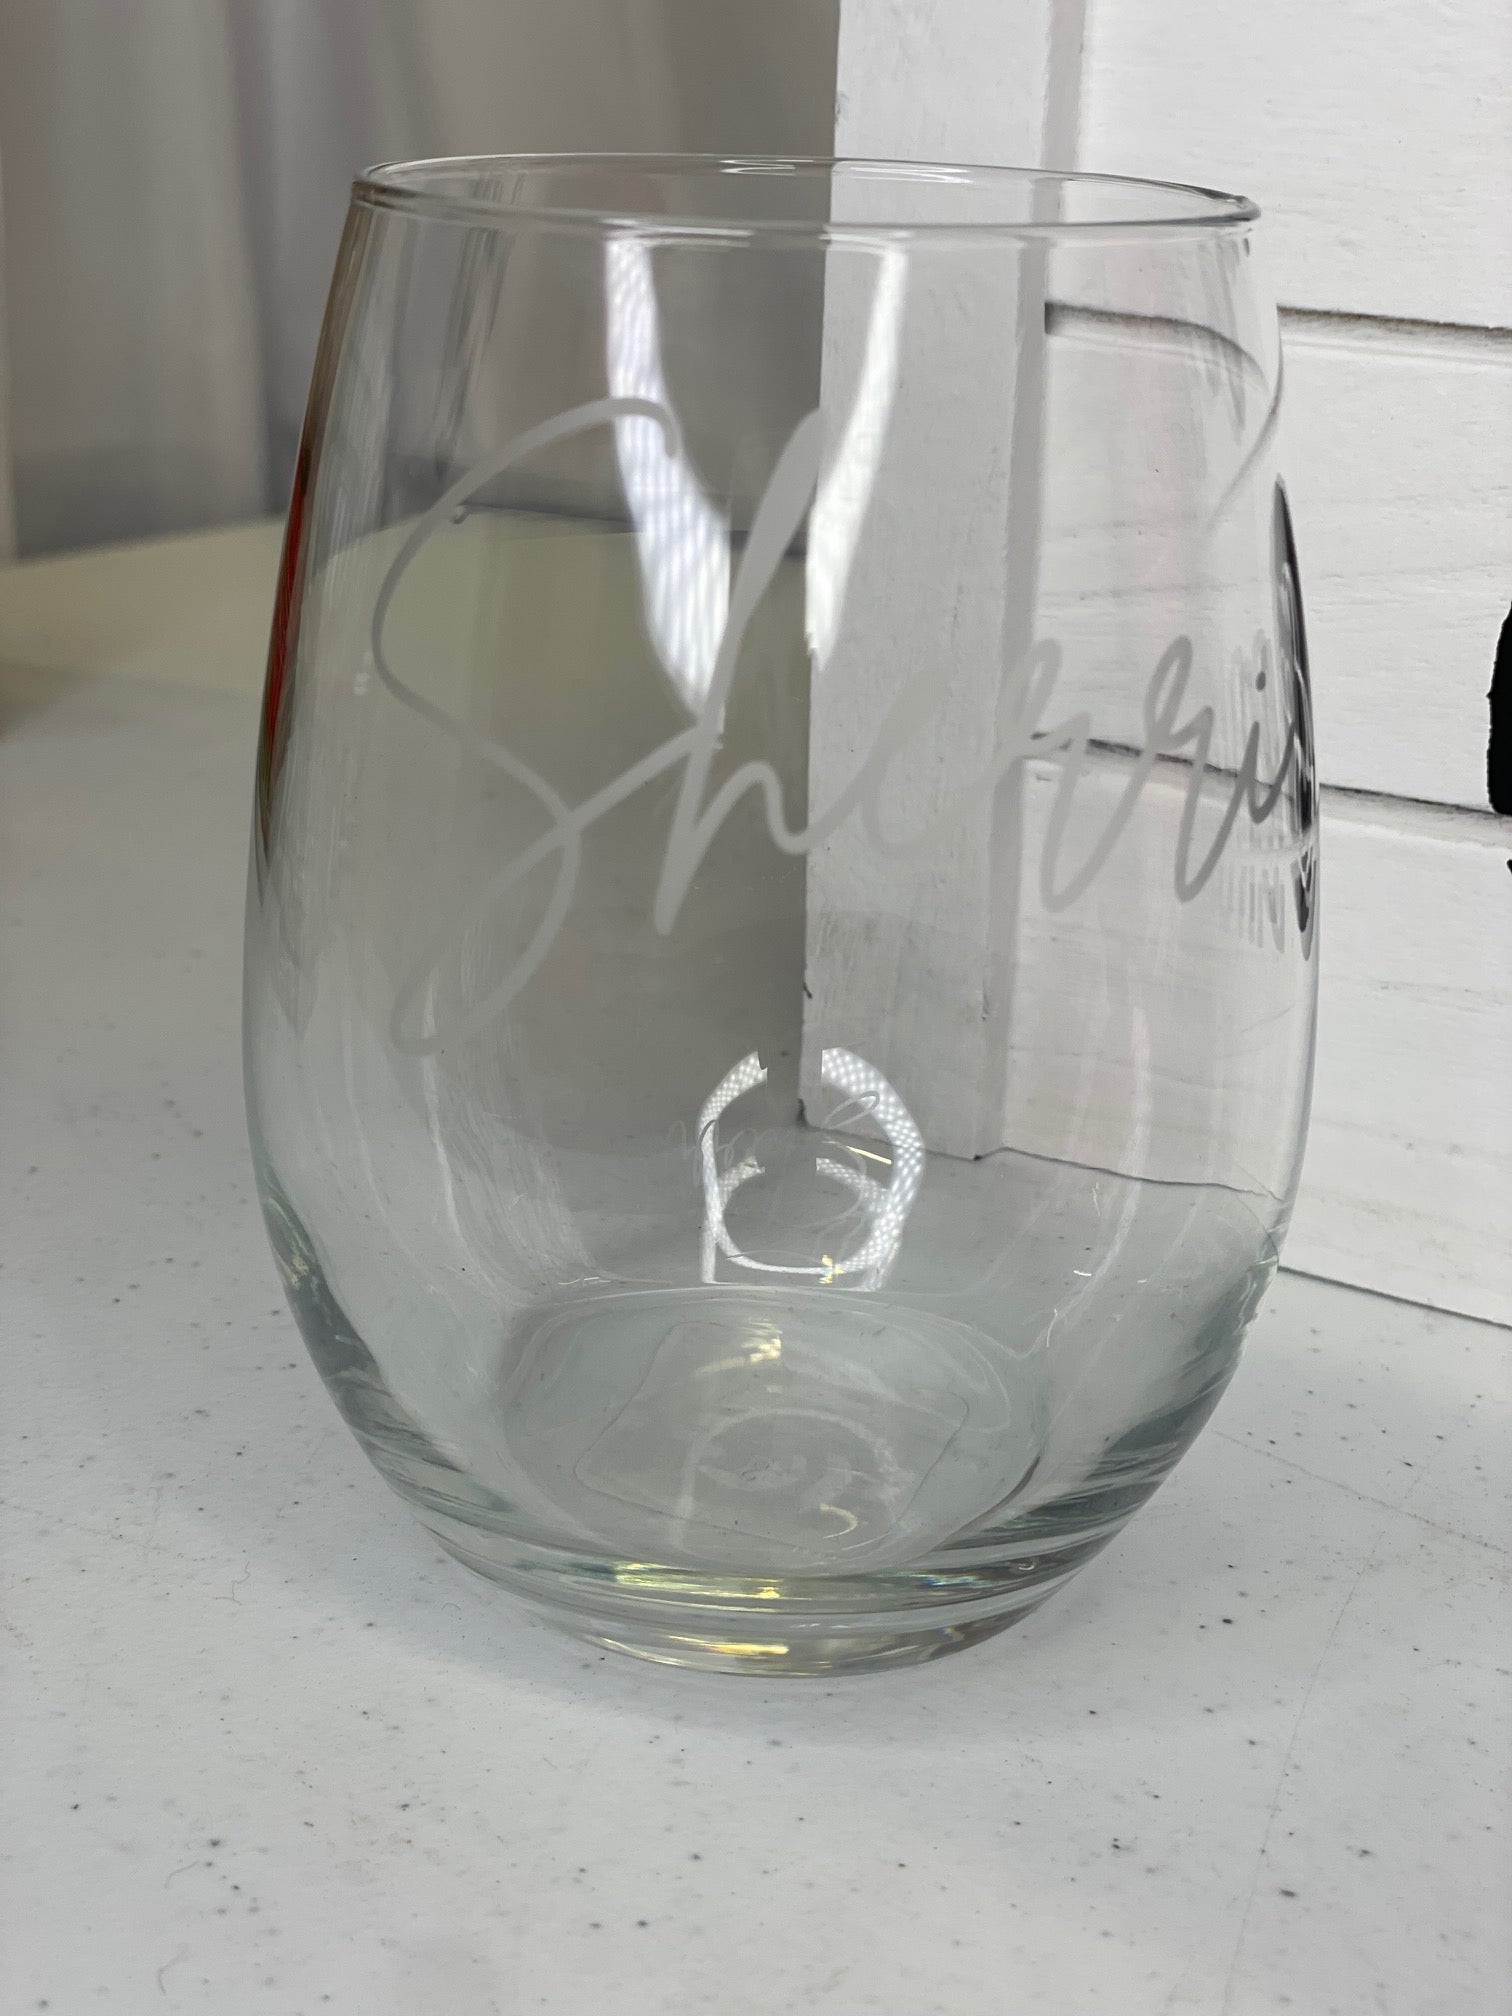 Personalized Crystal cocktail glasses - Great House Warming Gift